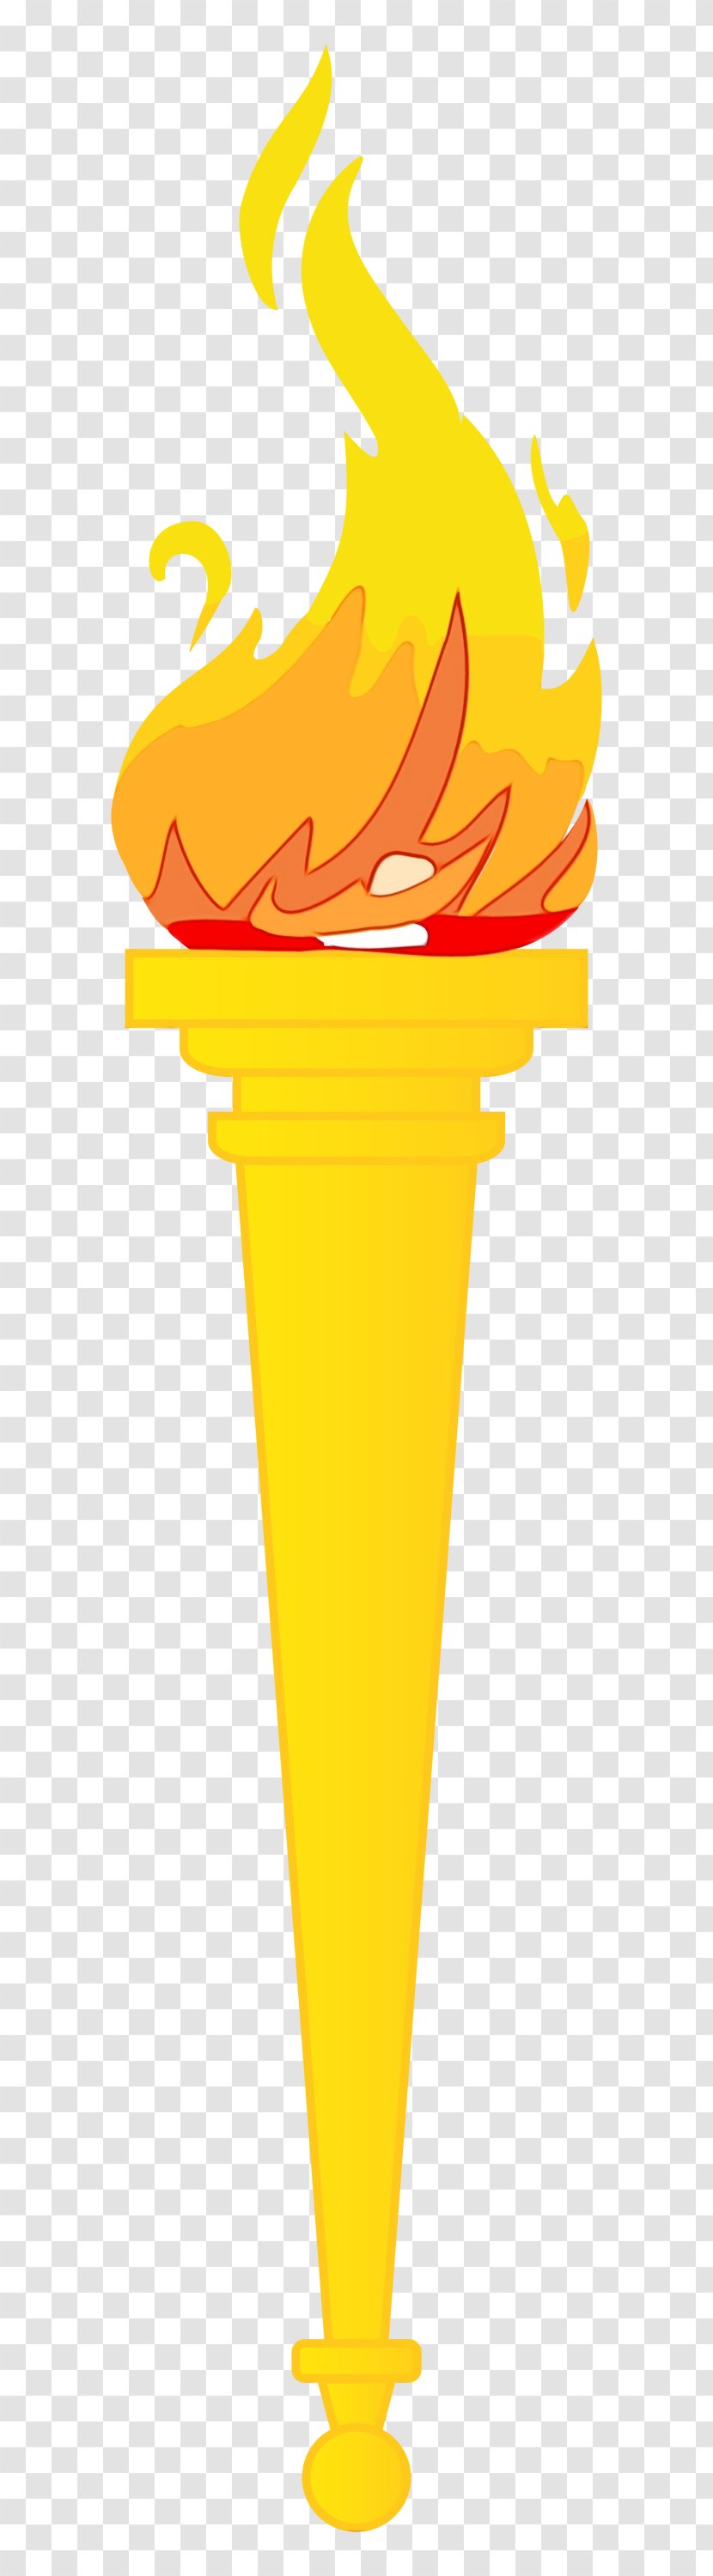 Ice Cream Cone Background - Torch - Yellow Transparent PNG